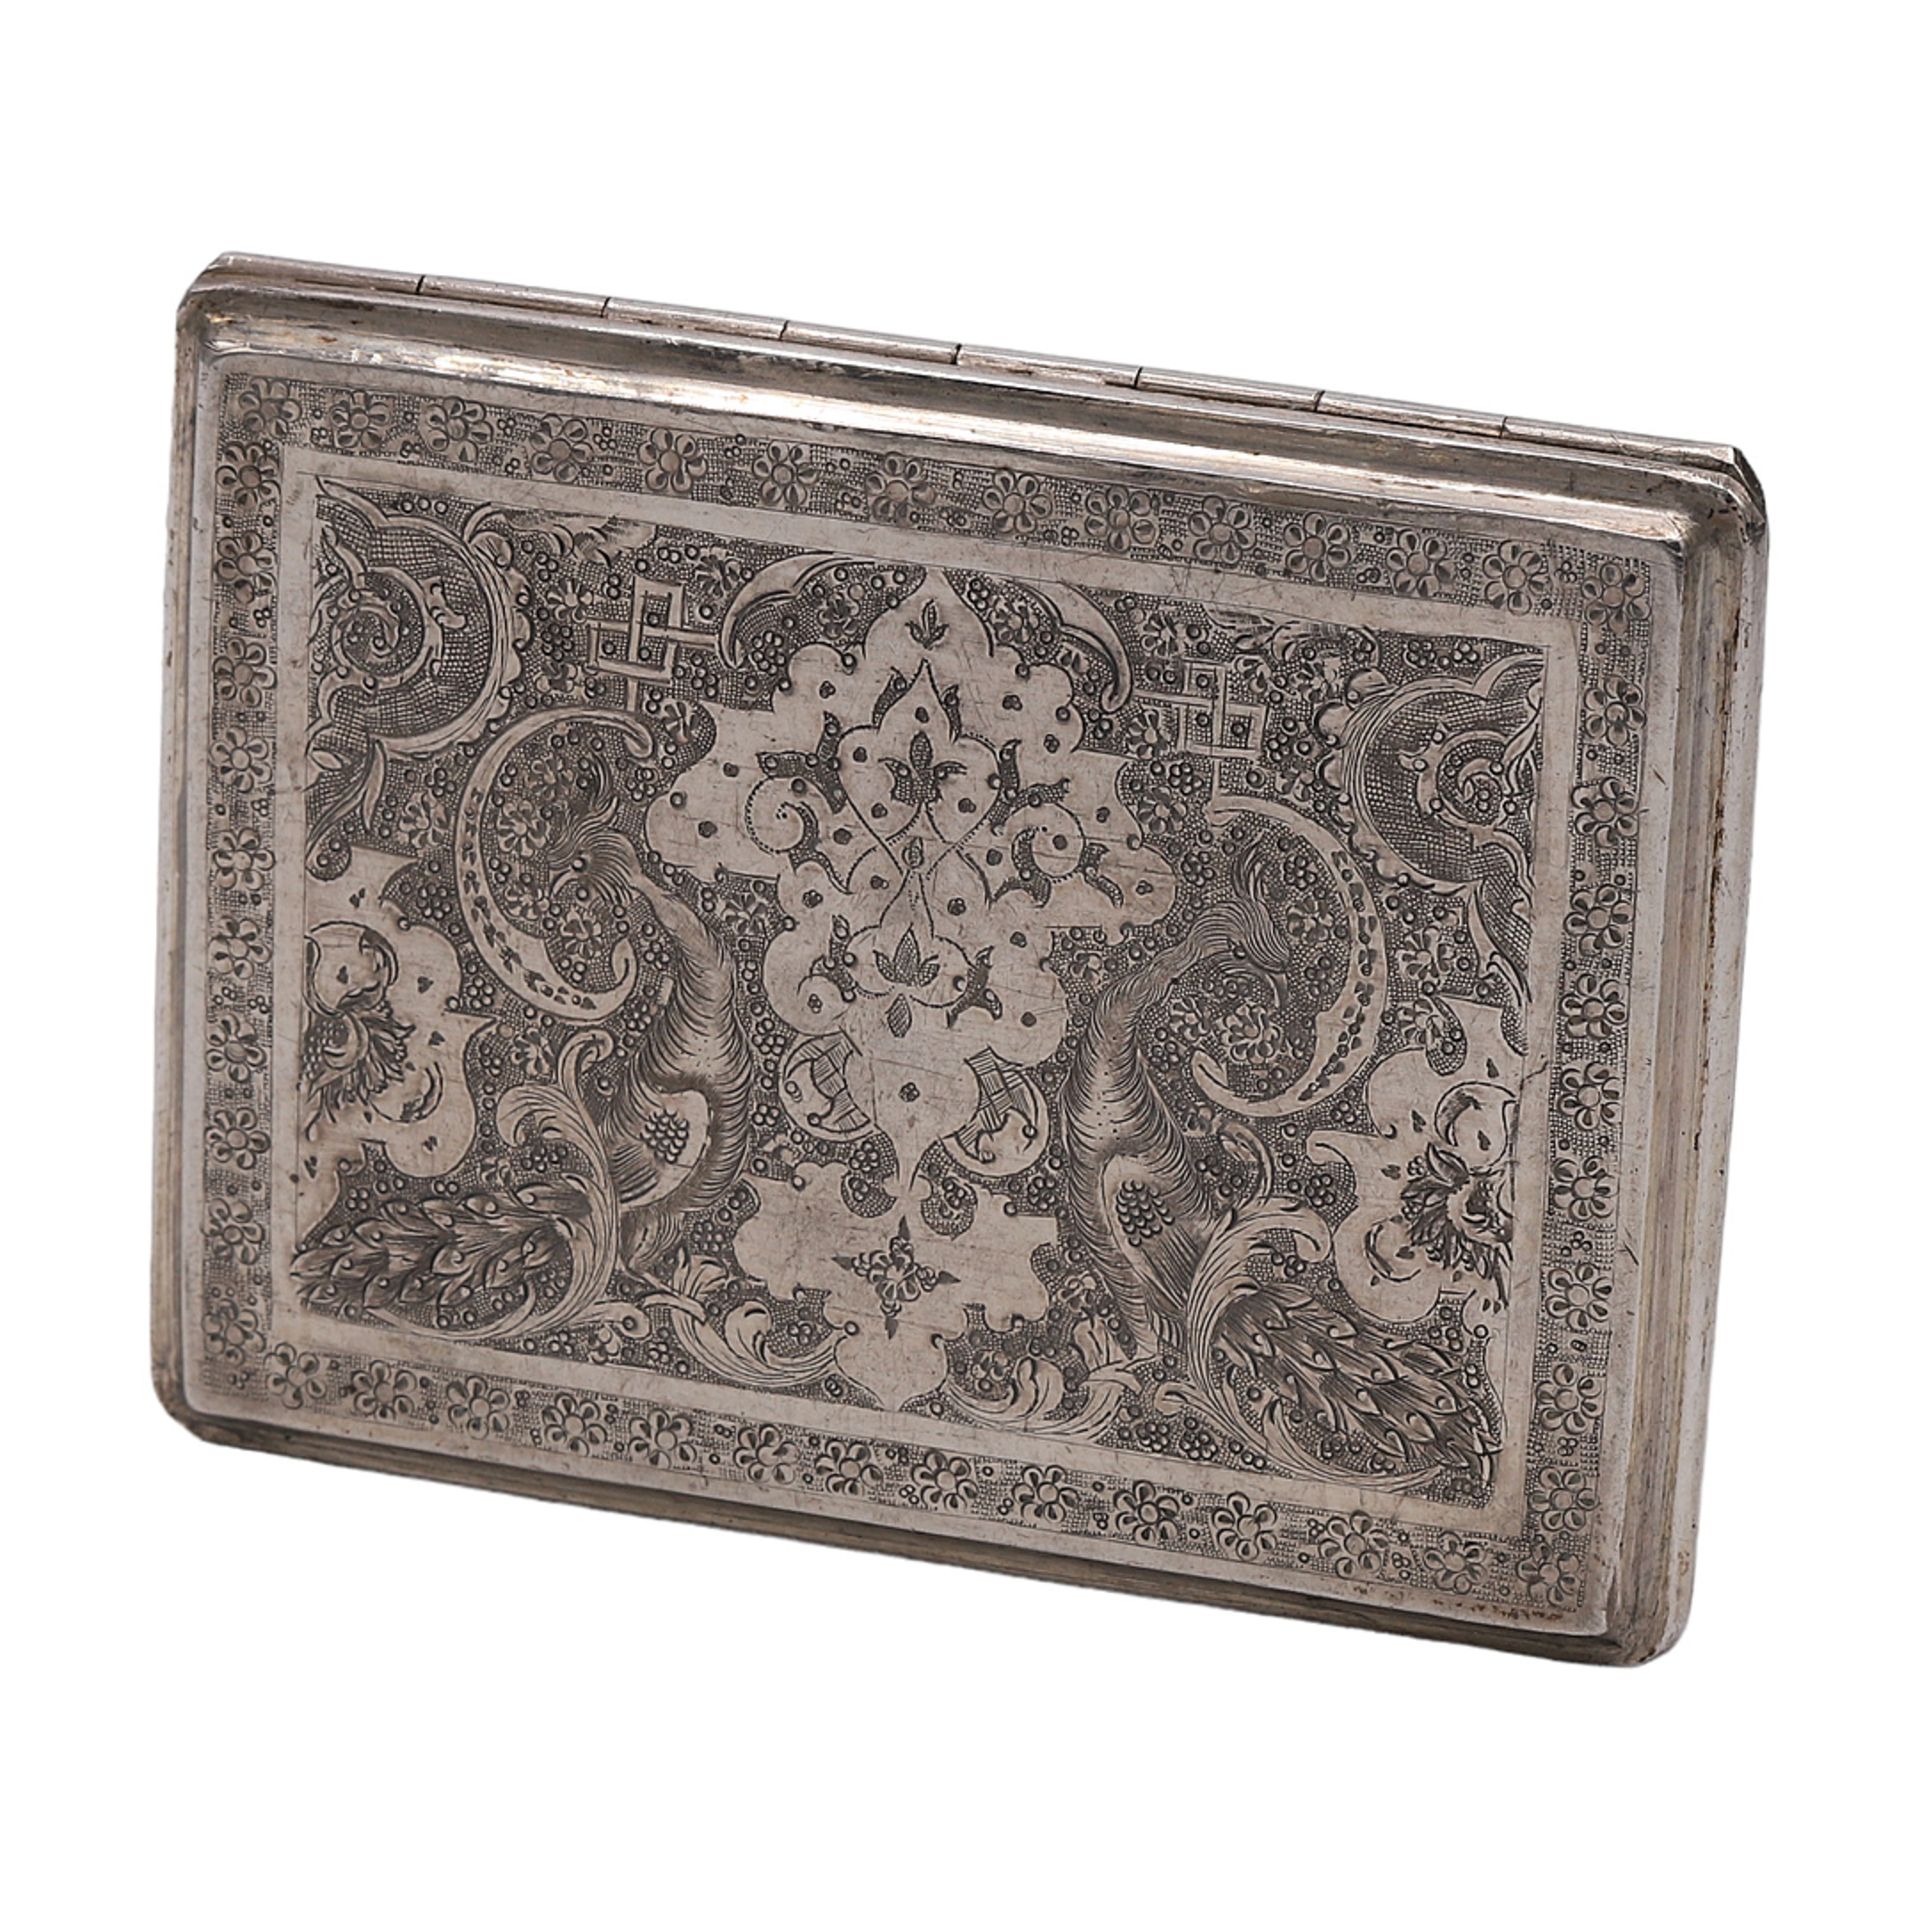 Flat cigarette case, Middle East, mid-20th century - Image 2 of 4